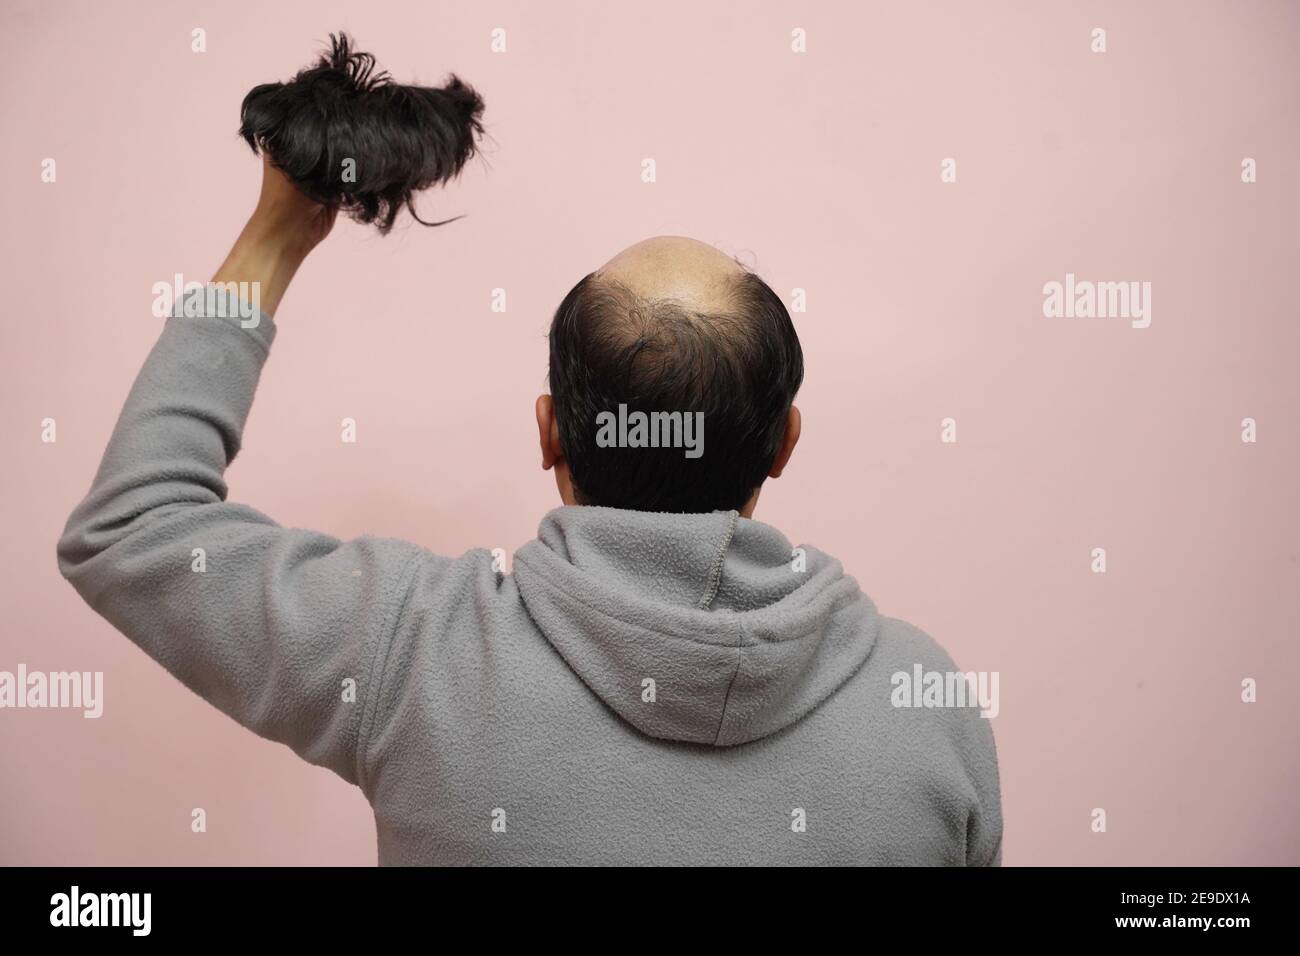 Closeup of a half-bald male holding his wig while wearing a hoodie with a pink background Stock Photo